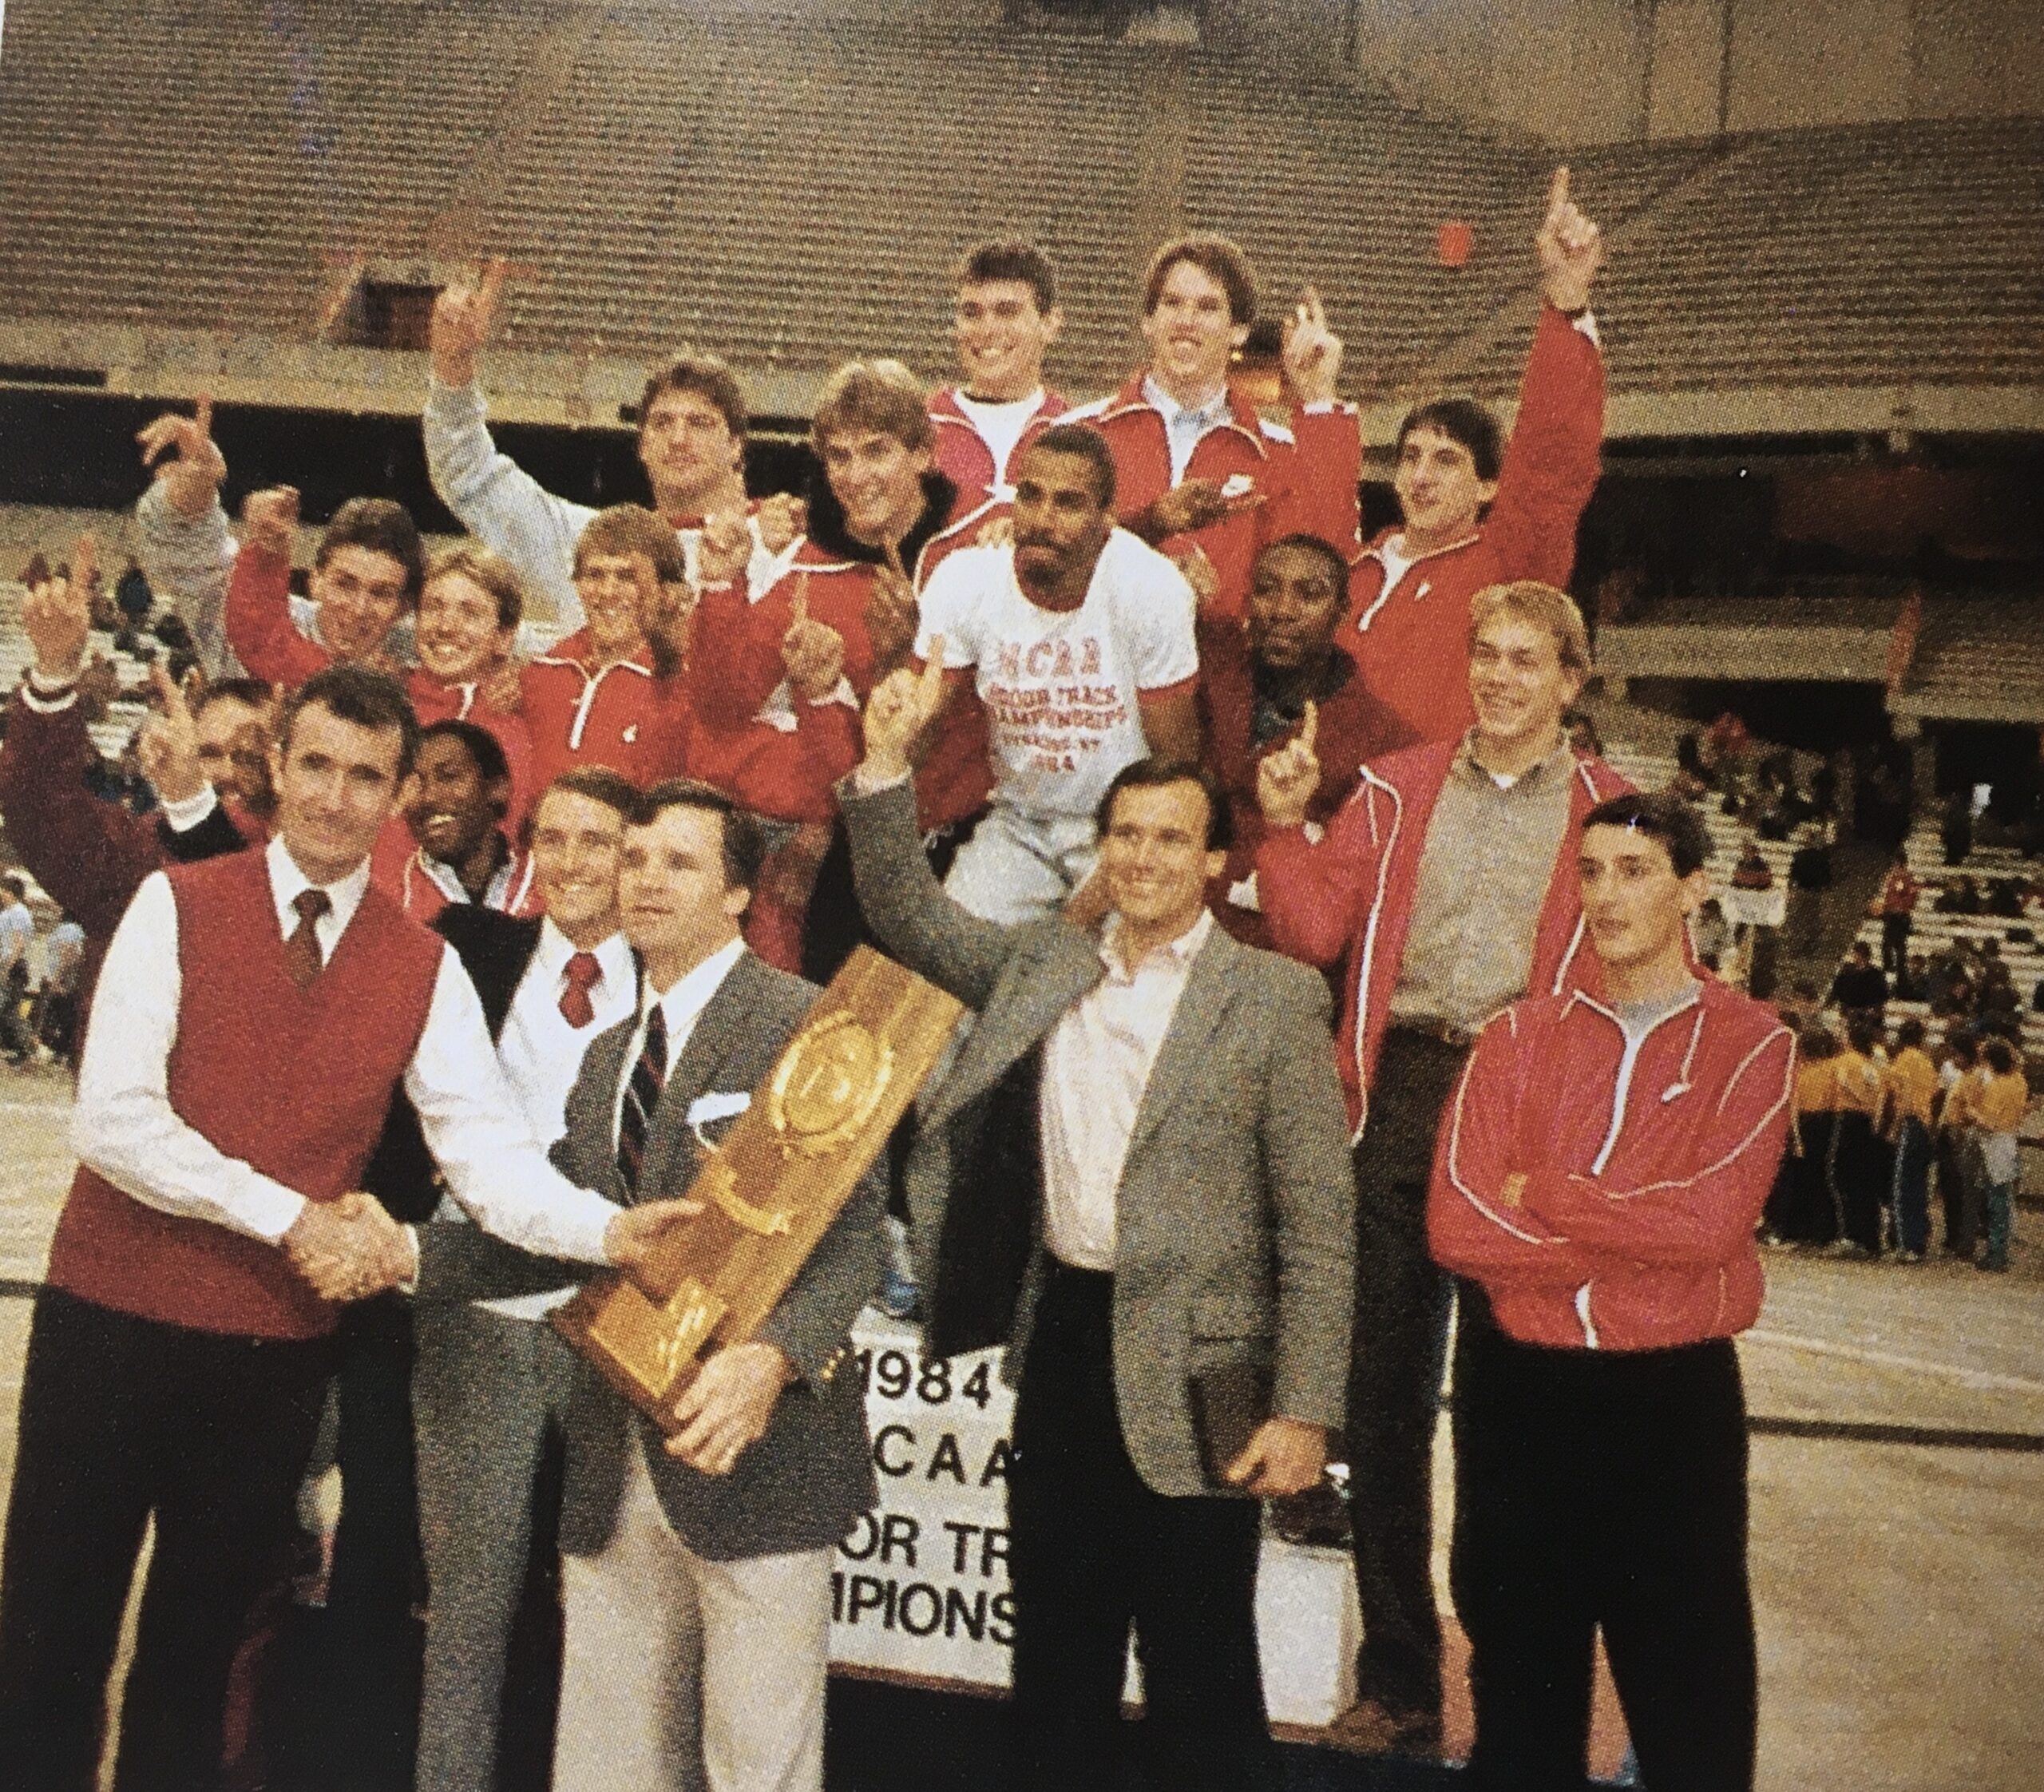 THE VERY FIRST NCAA TITLE - 1984 INDOORS 